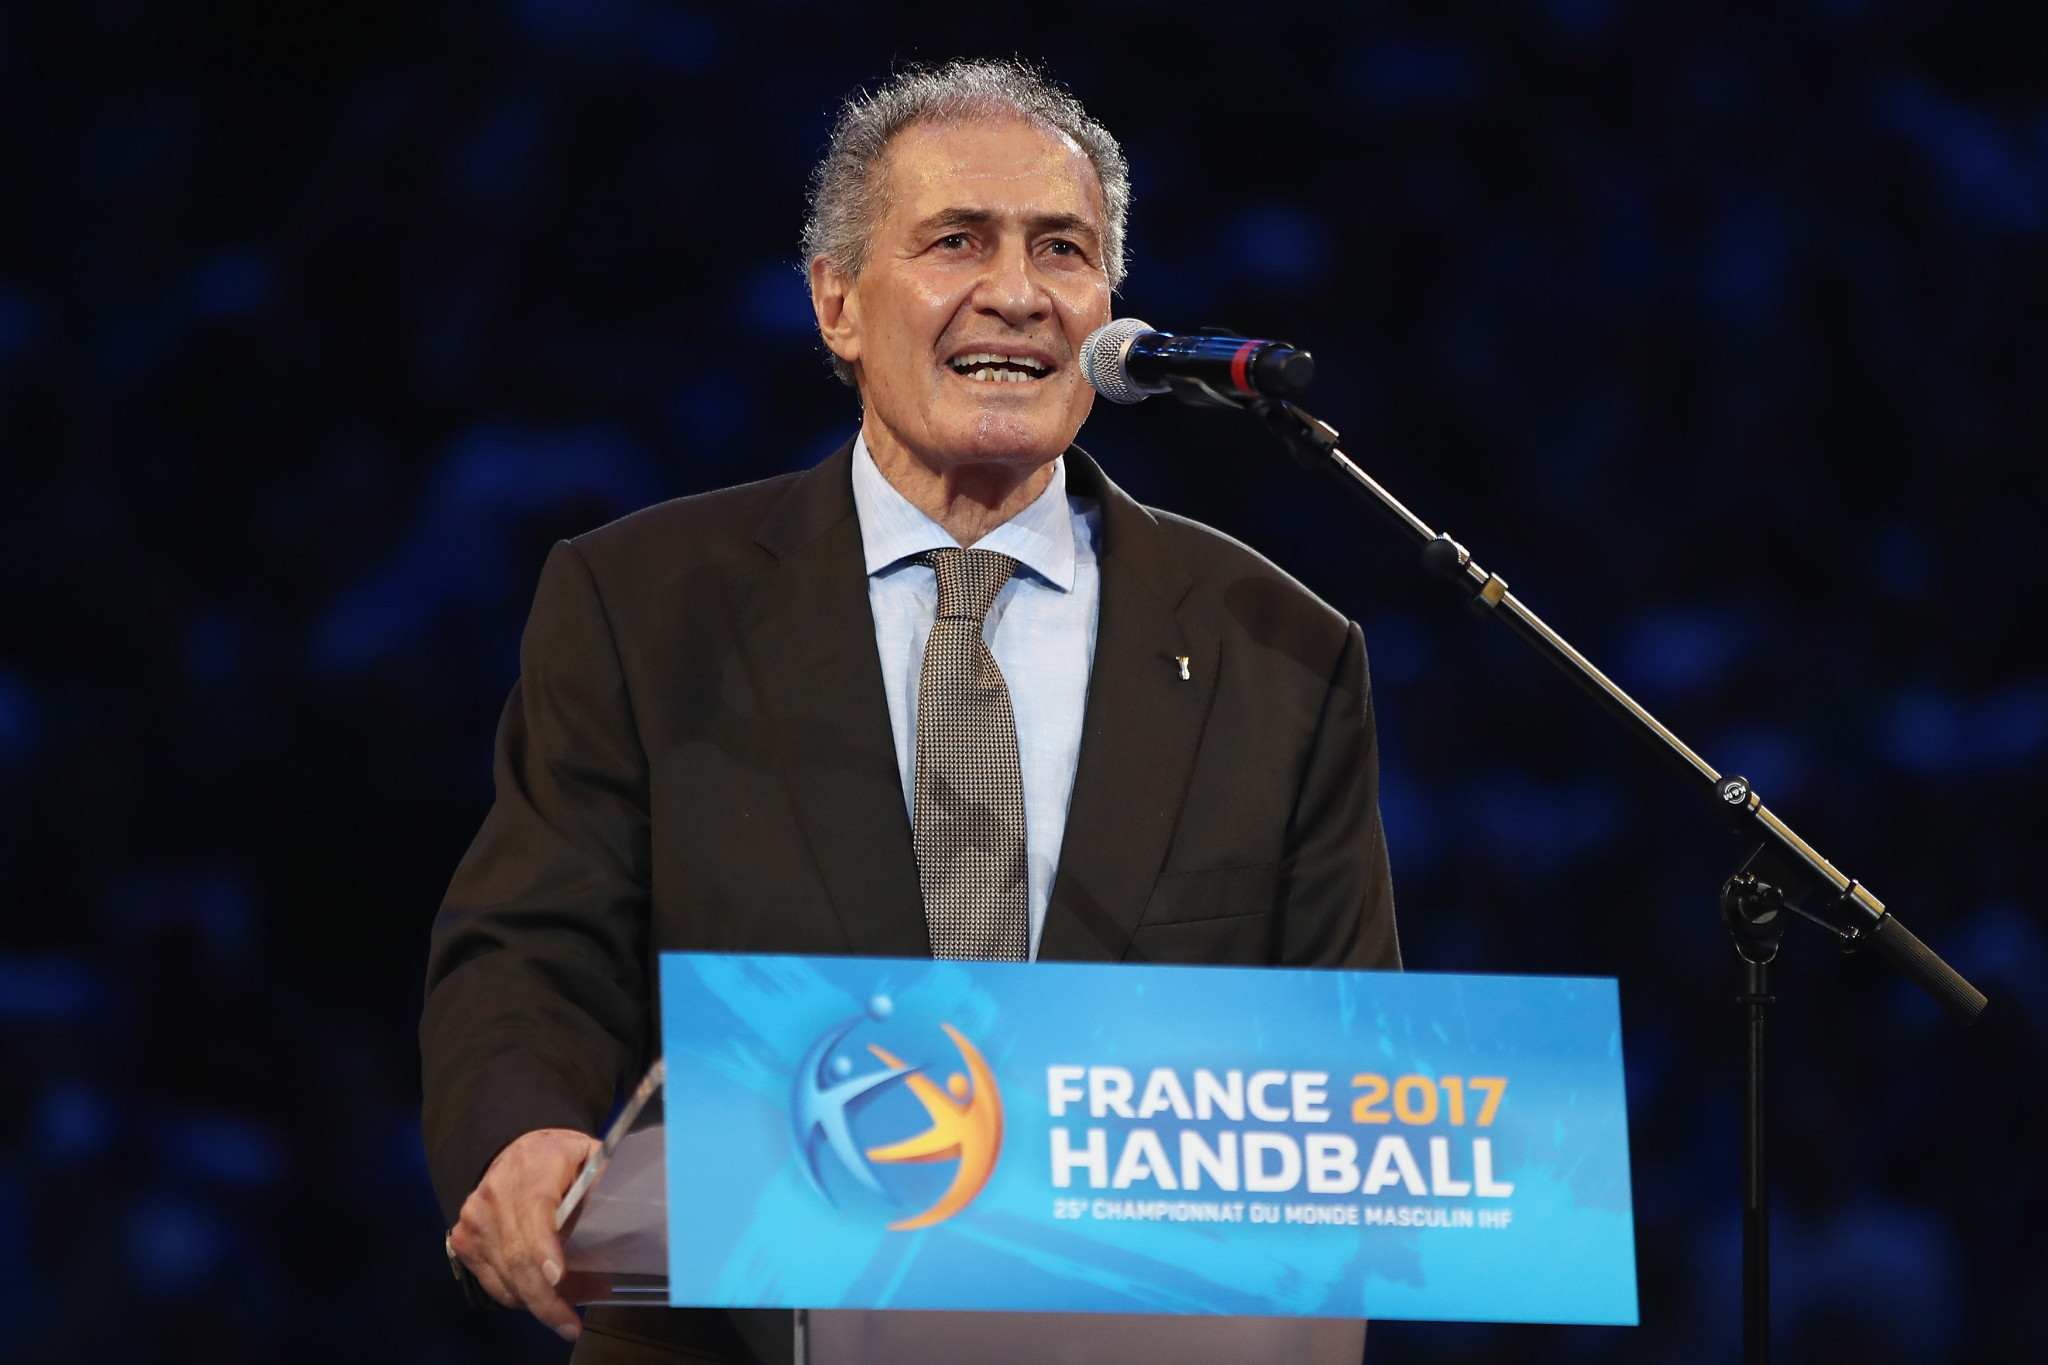 Hassan Moustafa is set to be re-elected unopposed as President of the International Handball Federation ©Getty Images